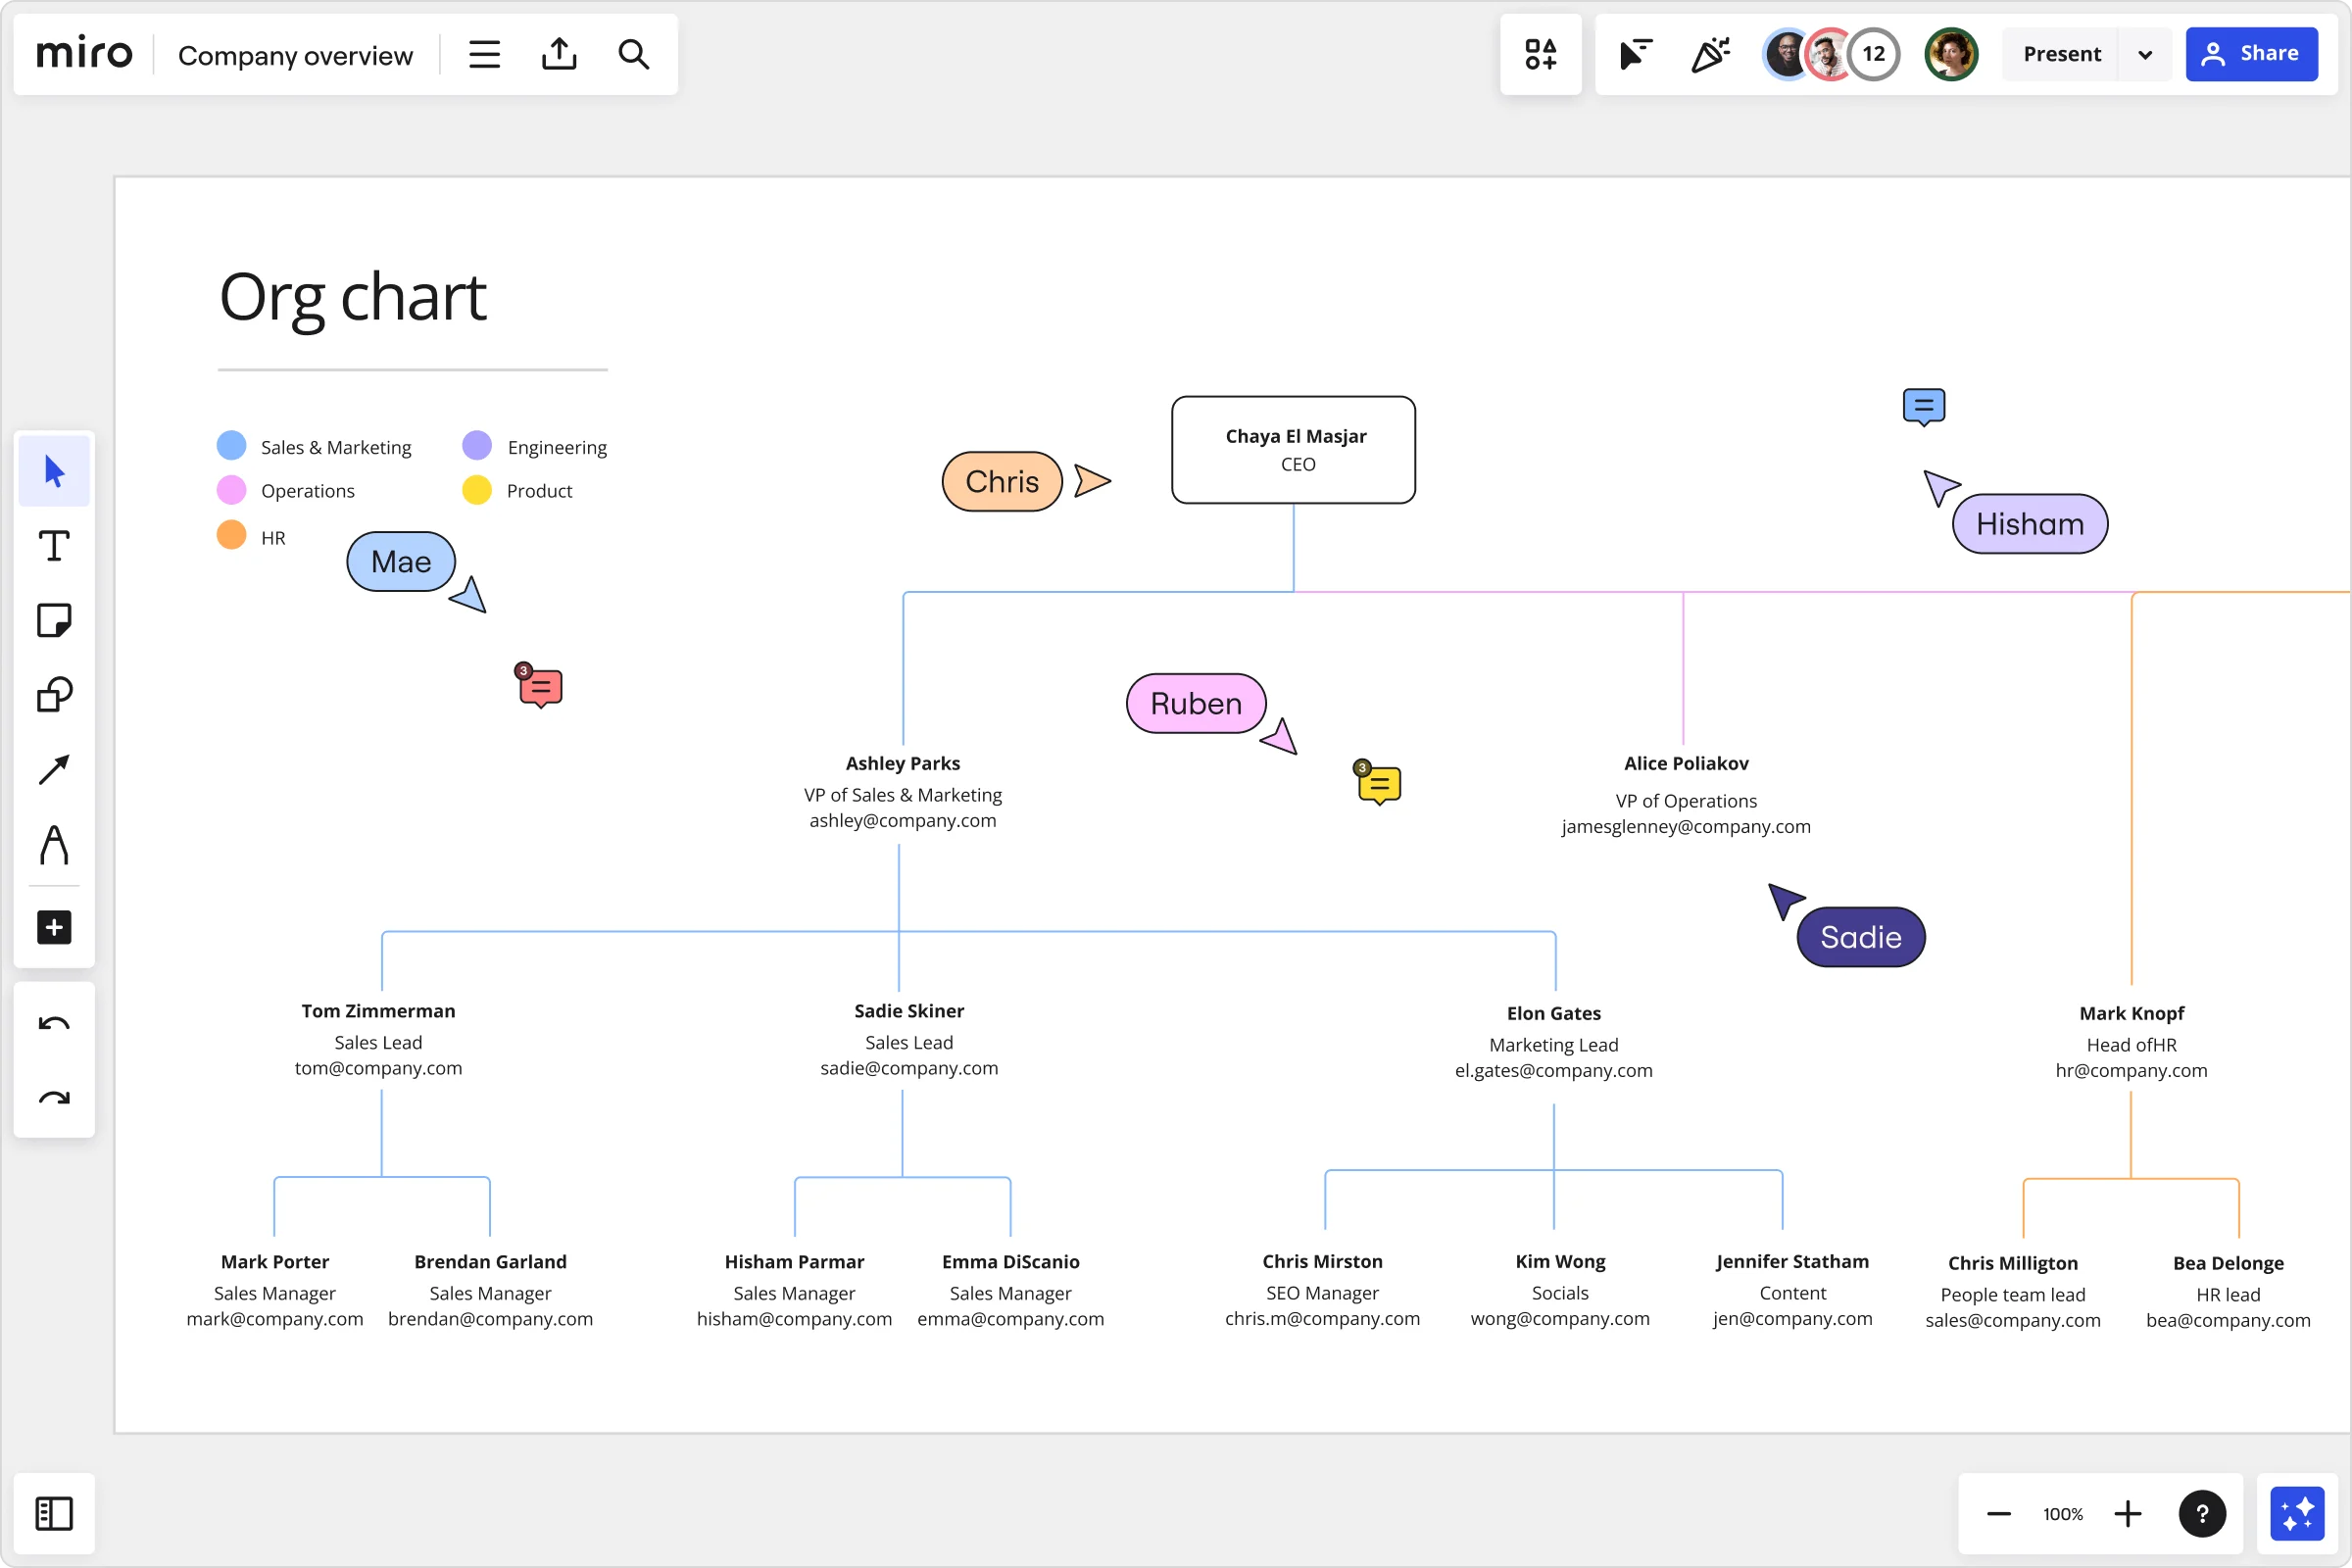 Image showing Miro's org chart tool in use